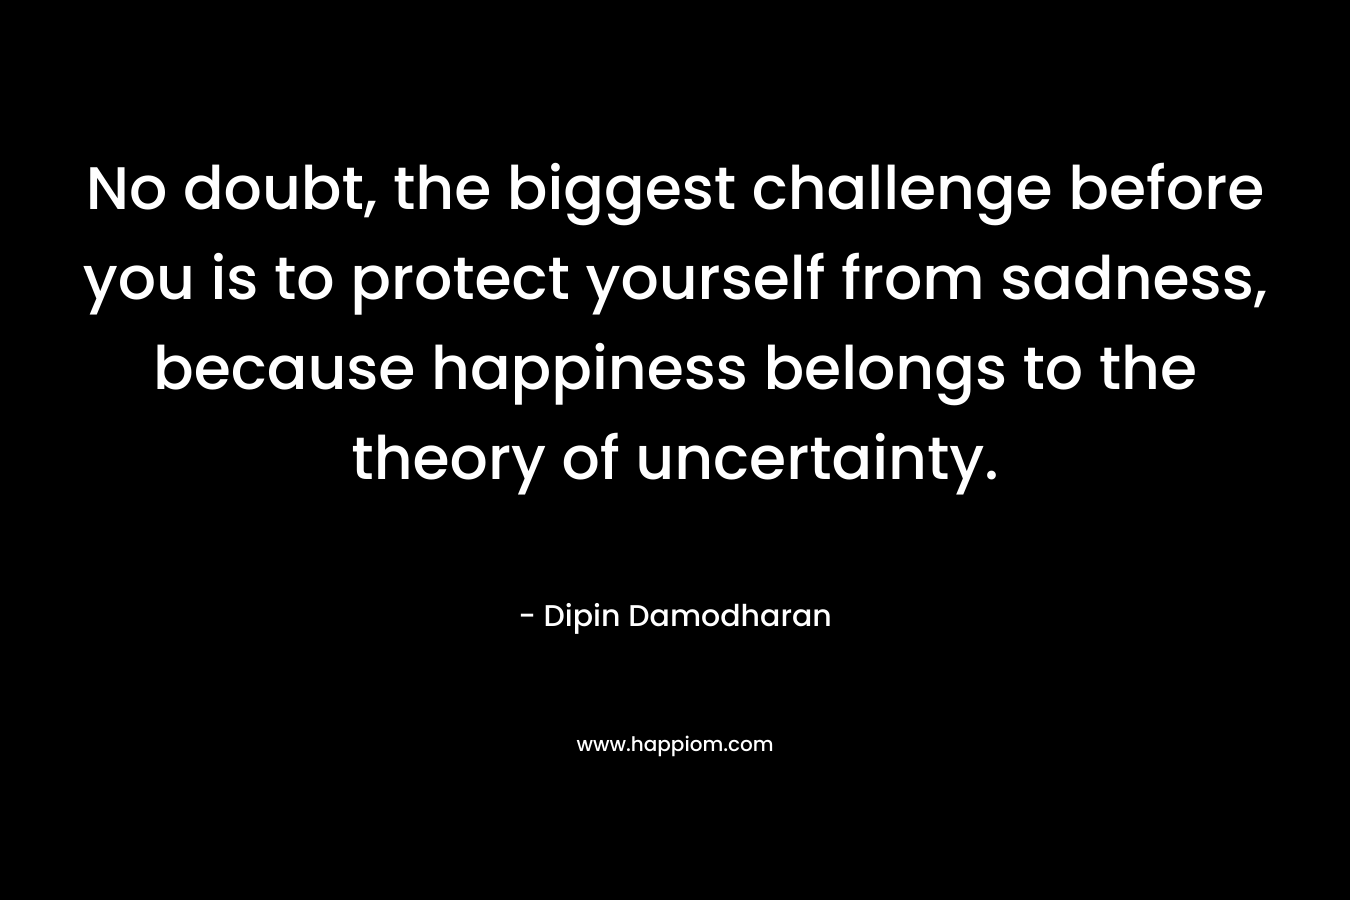 No doubt, the biggest challenge before you is to protect yourself from sadness, because happiness belongs to the theory of uncertainty. – Dipin Damodharan